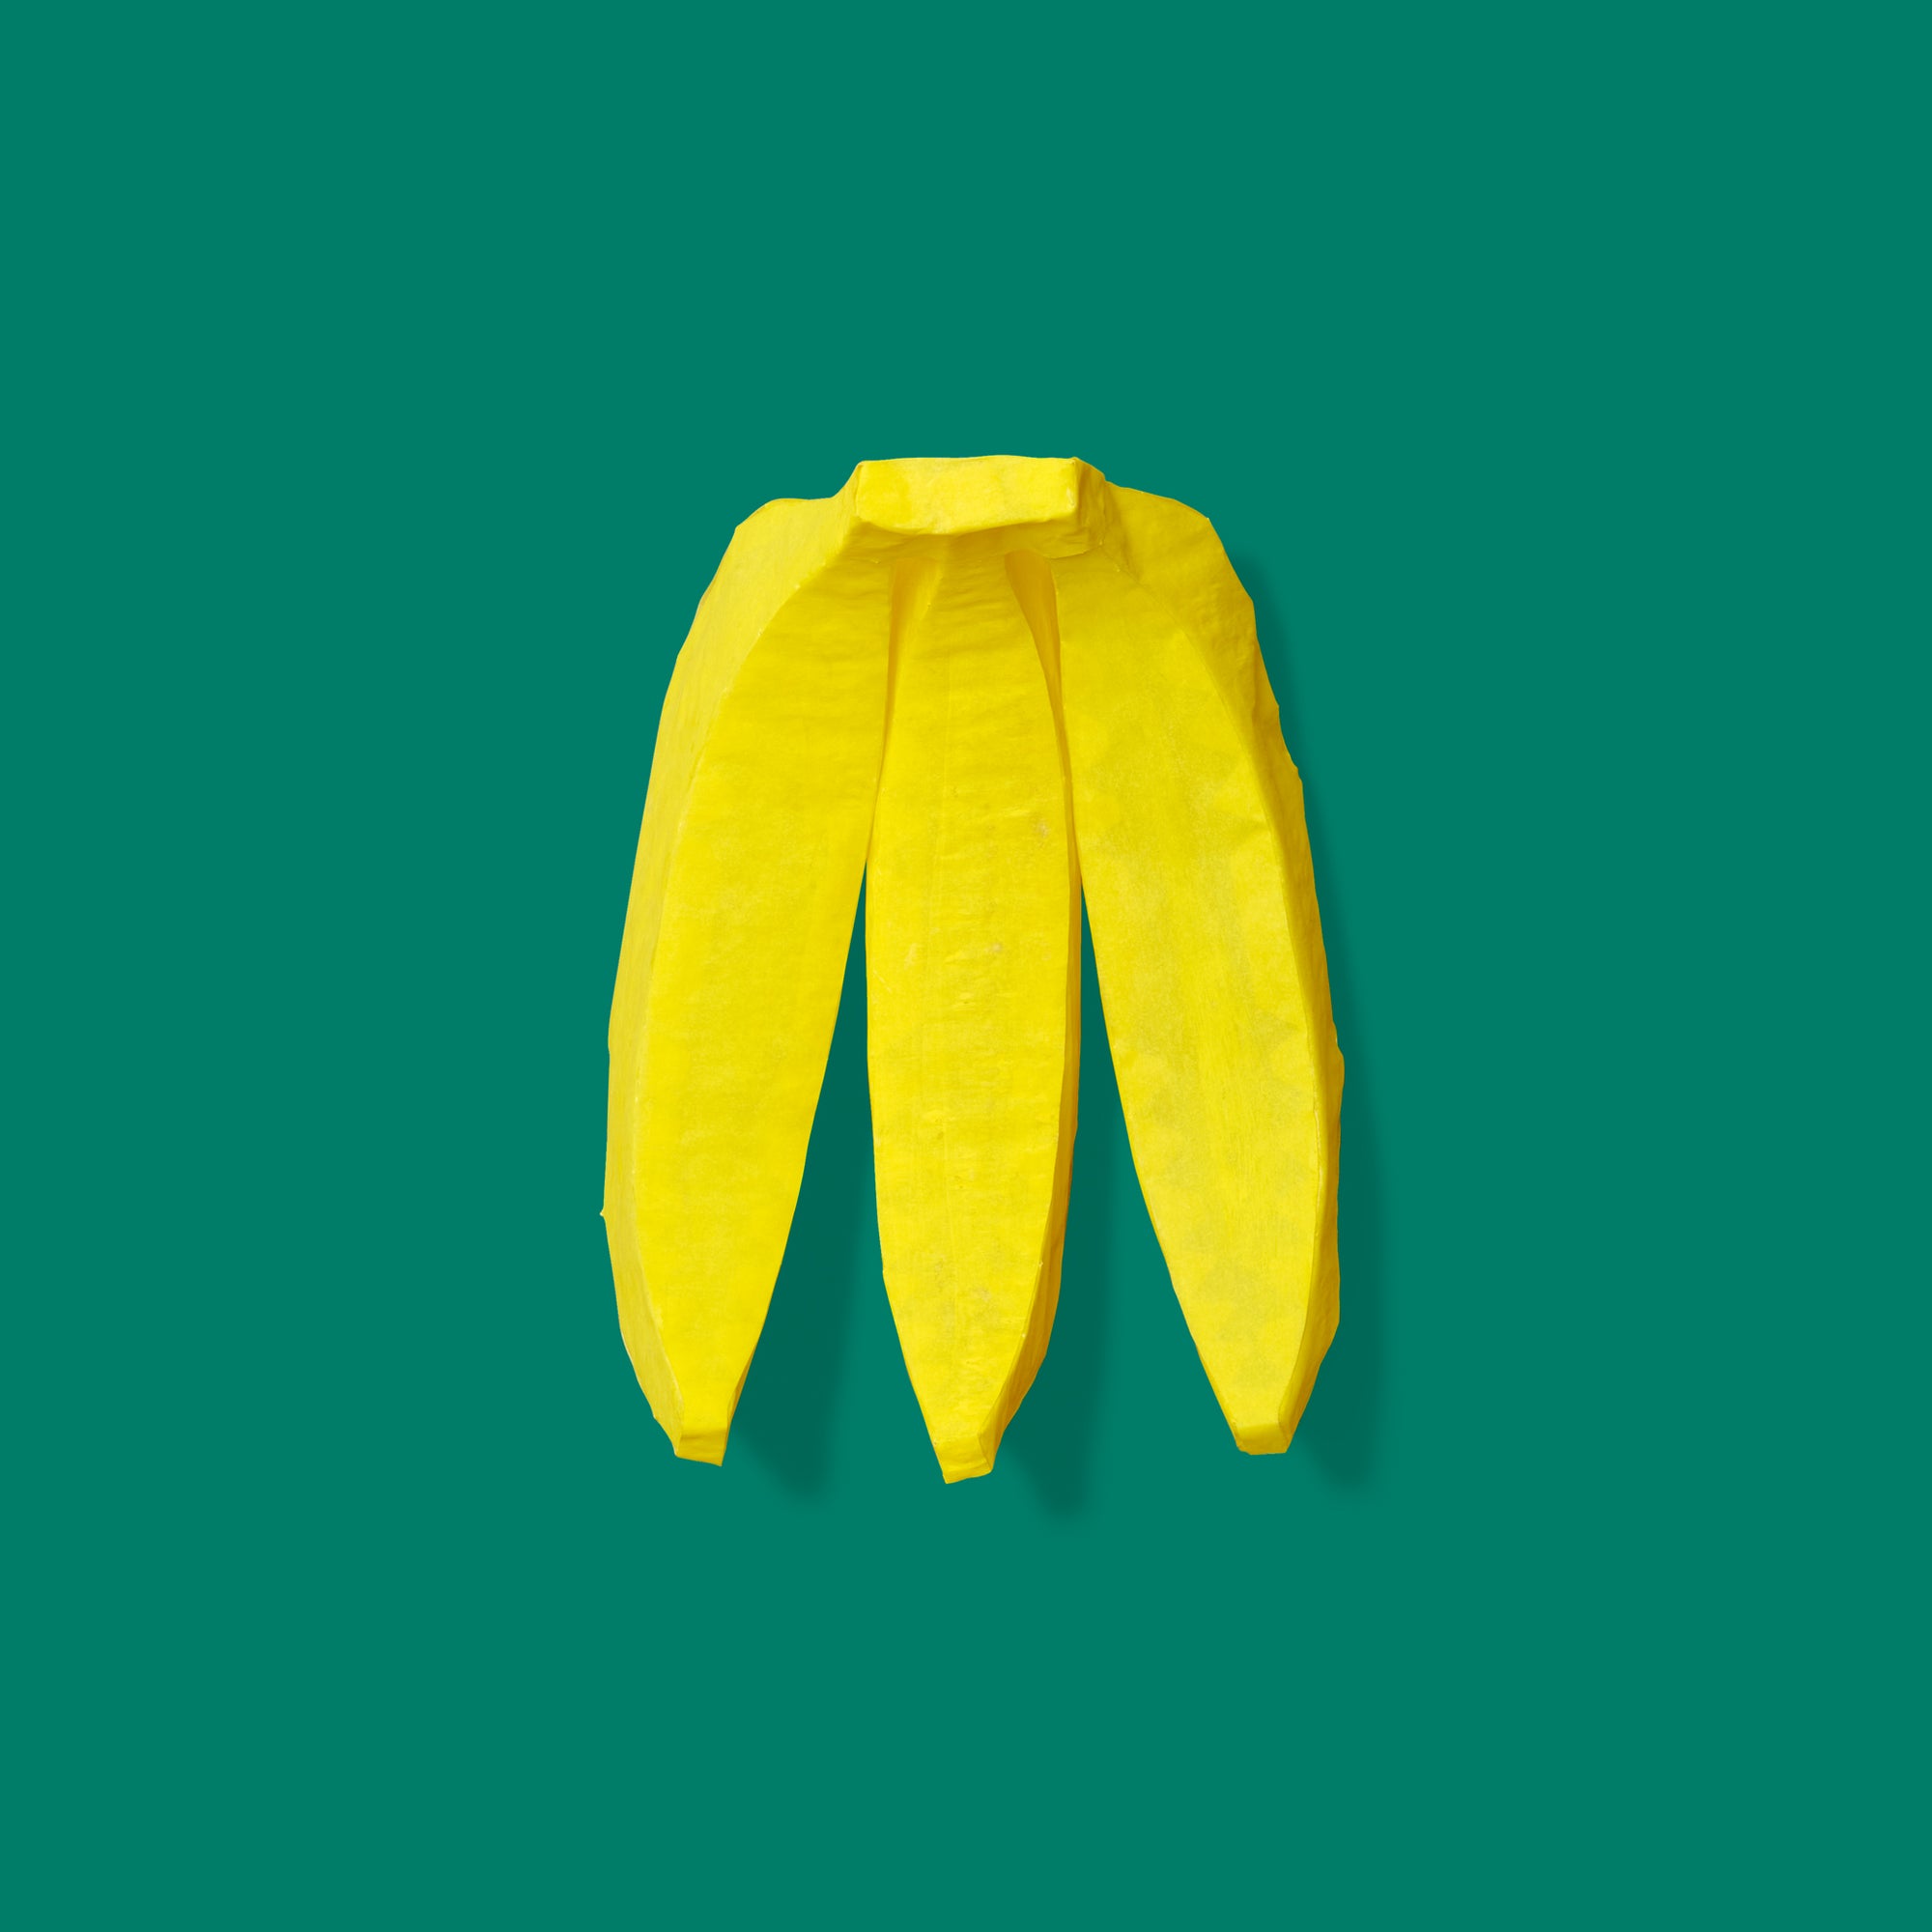 Yellow Bunch of Bananas made from Paper by Momoca